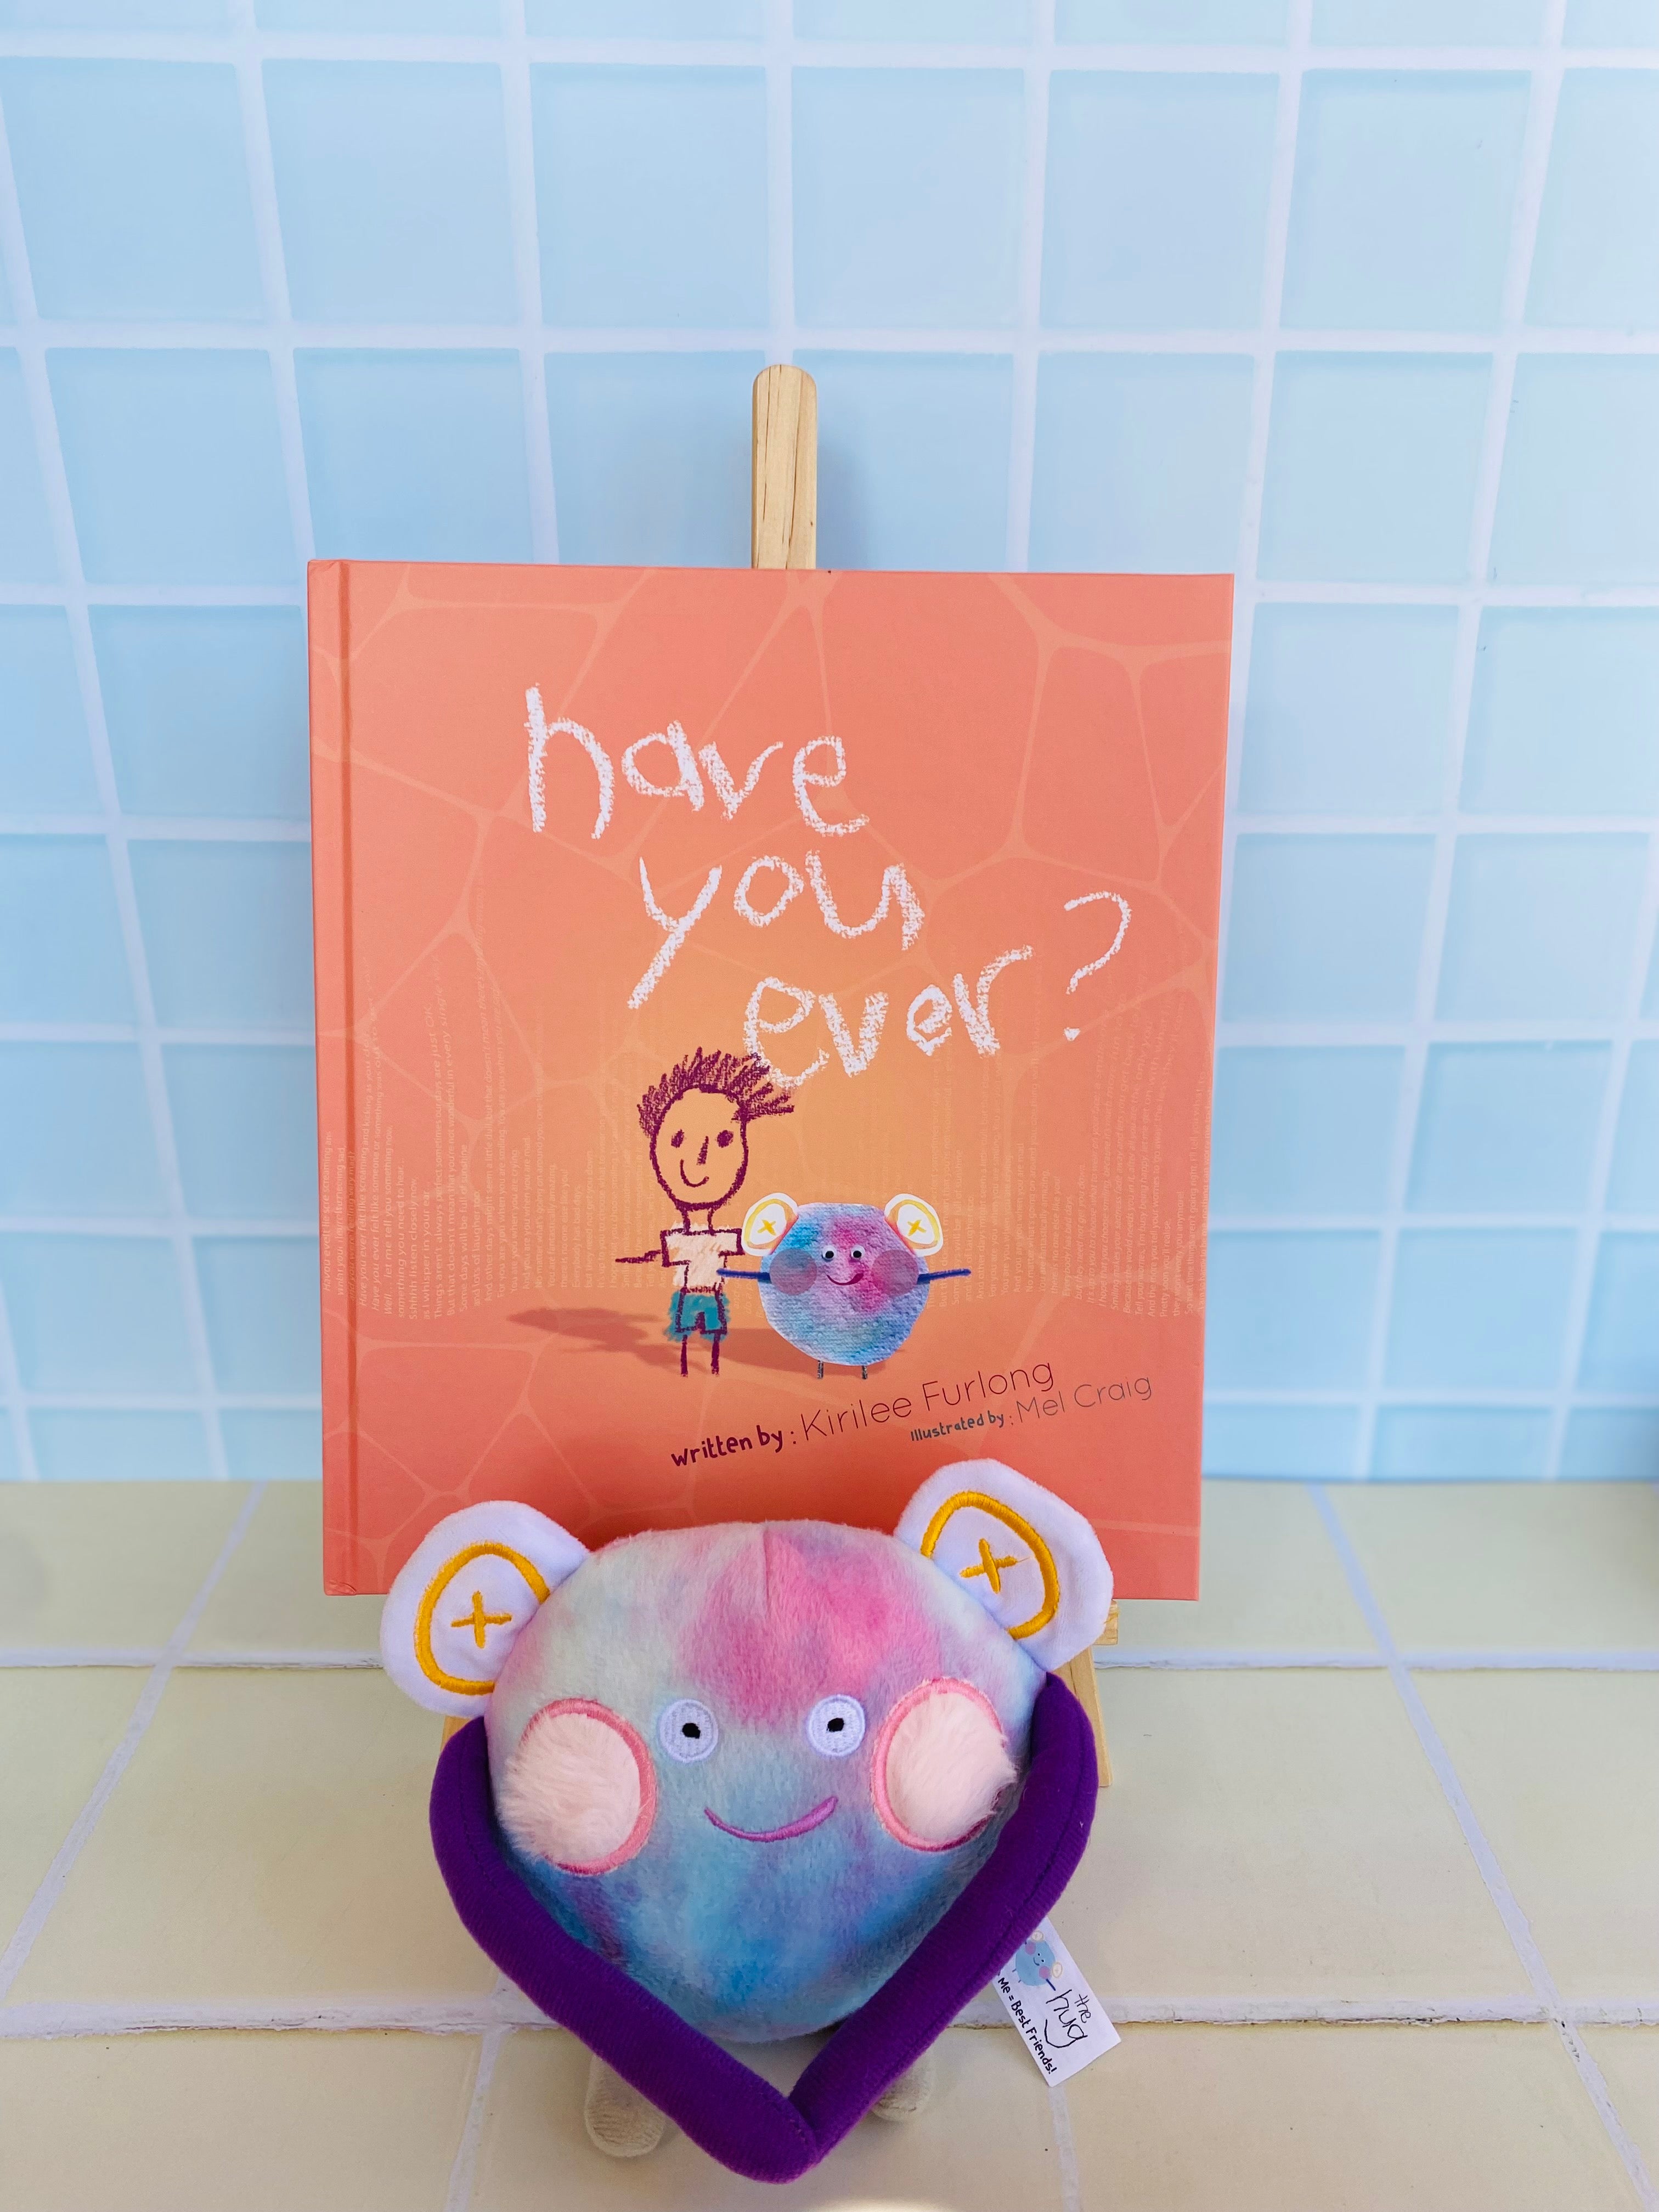 Toy　Cuddle　with　Hug　Ever?　The　Book　You　Children's　Hardcover　Have　–